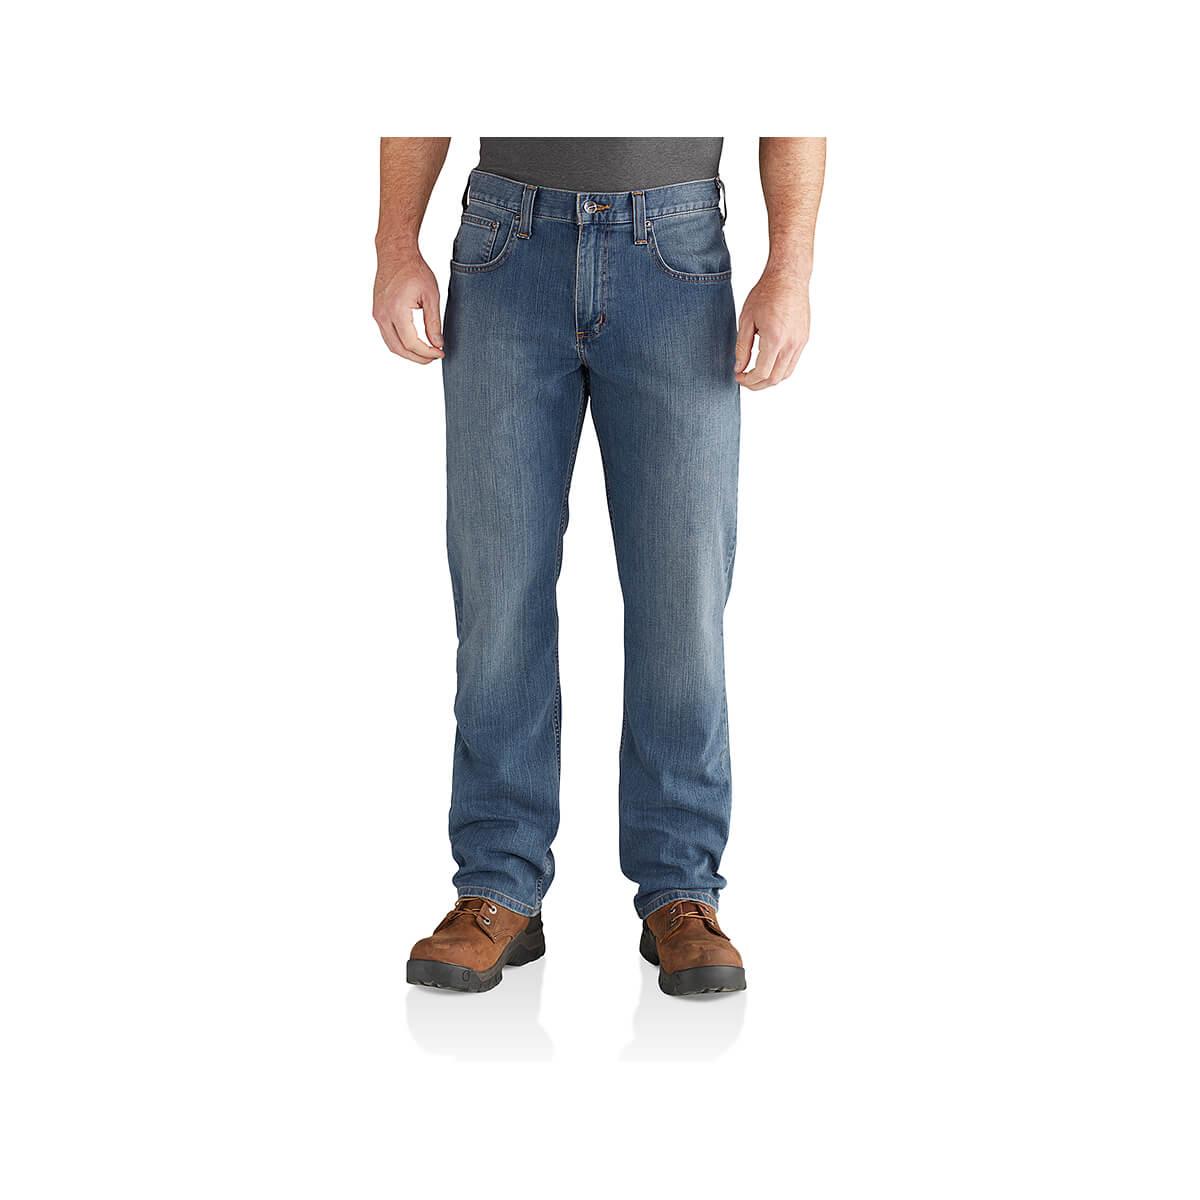  Men's Rugged Flex Relaxed Fit Straight Leg Jeans